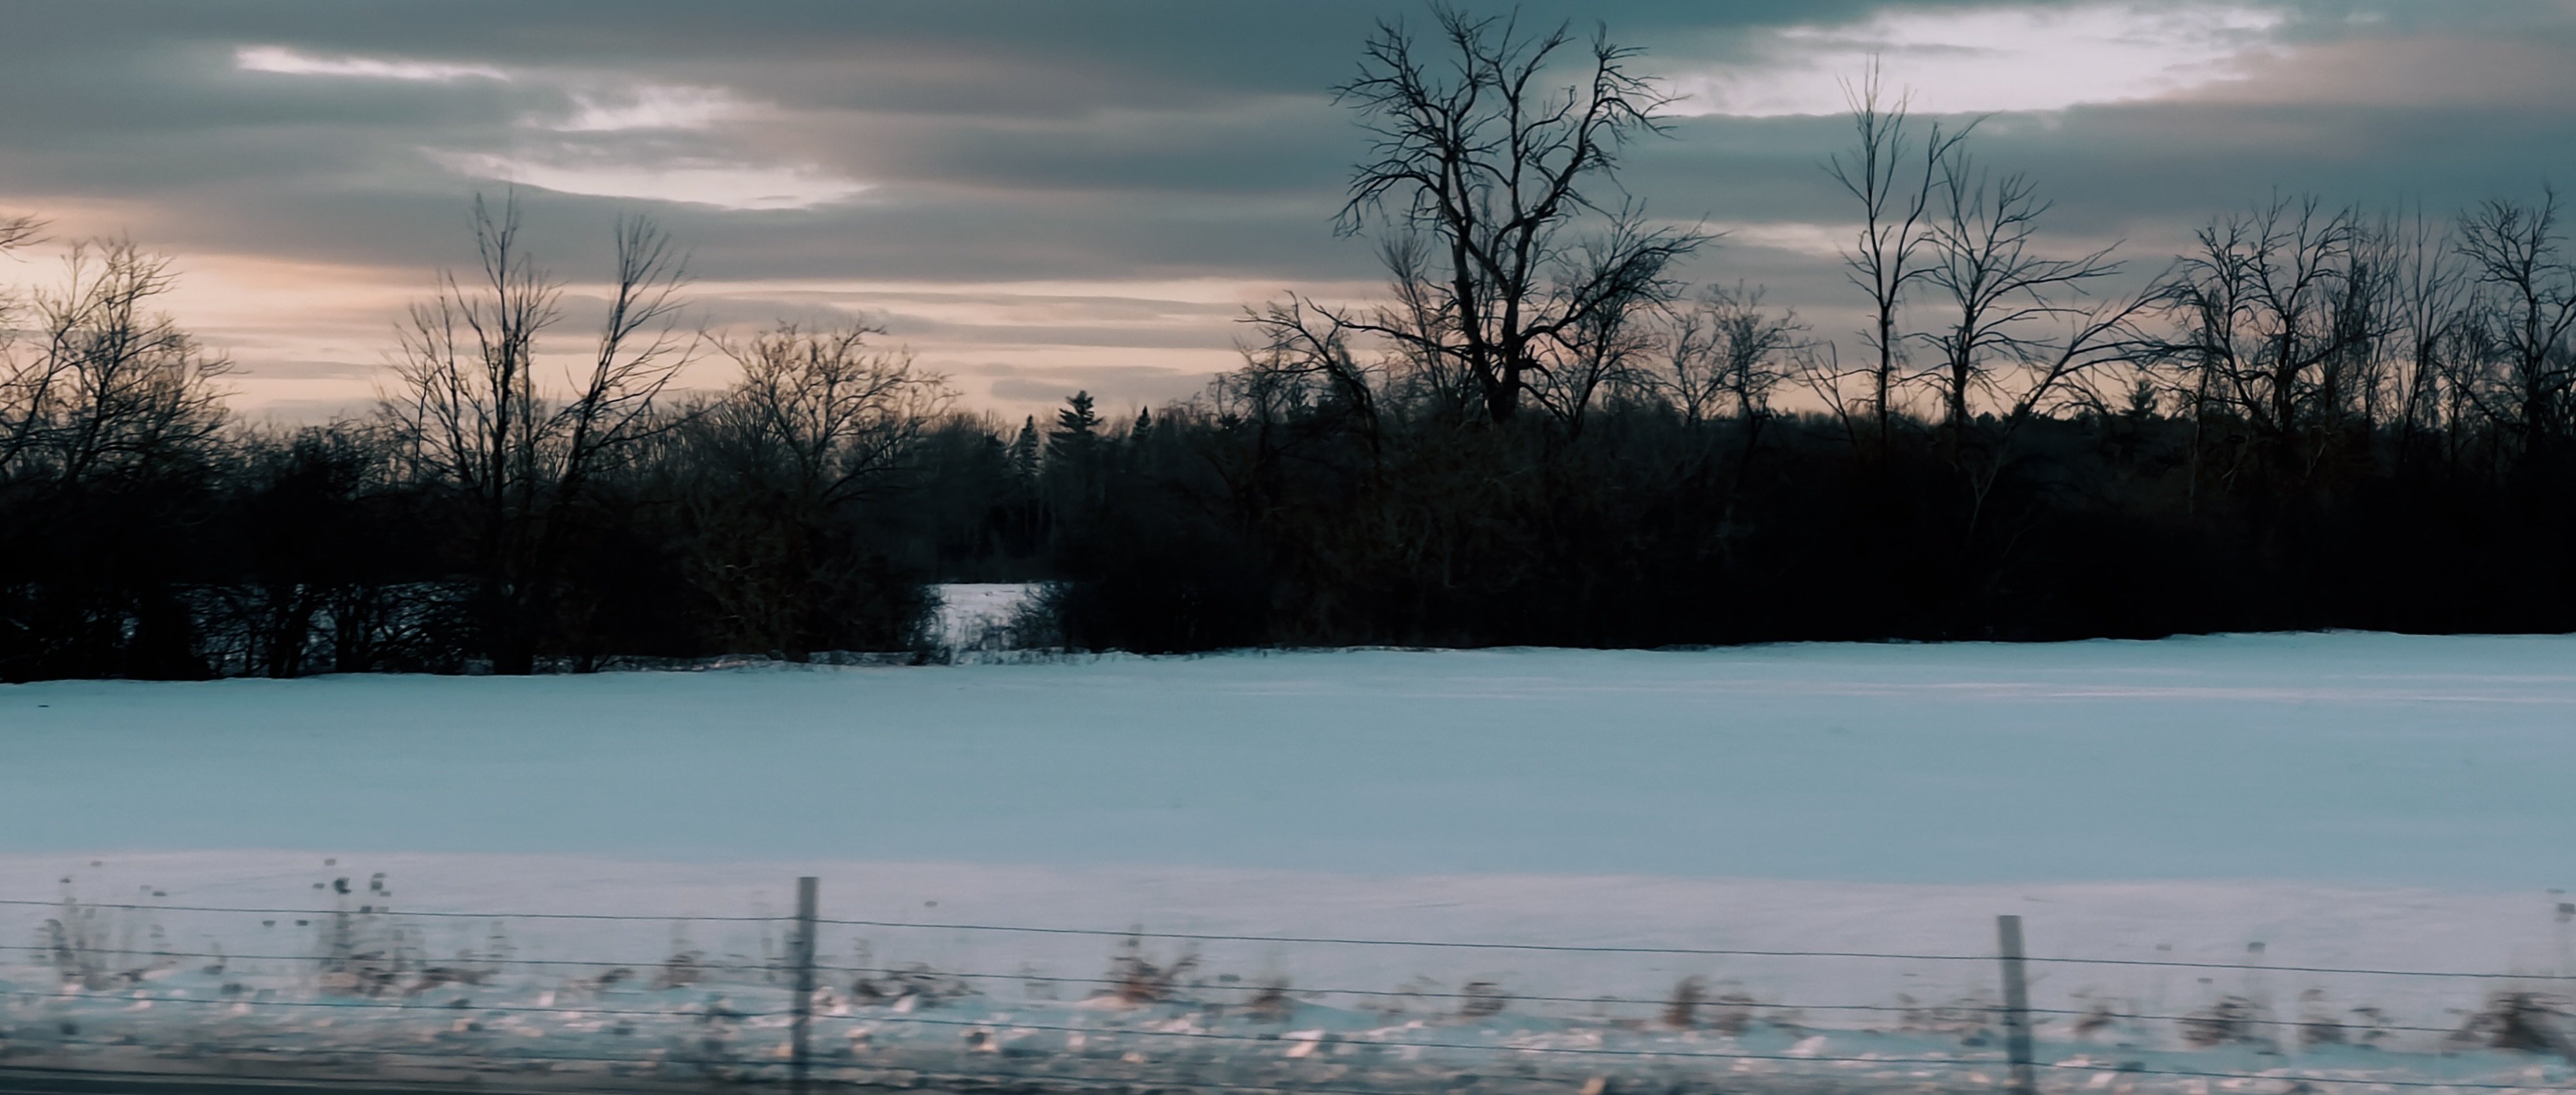 An image of A color-graded image of a snowy field taken from the side of a moving car.